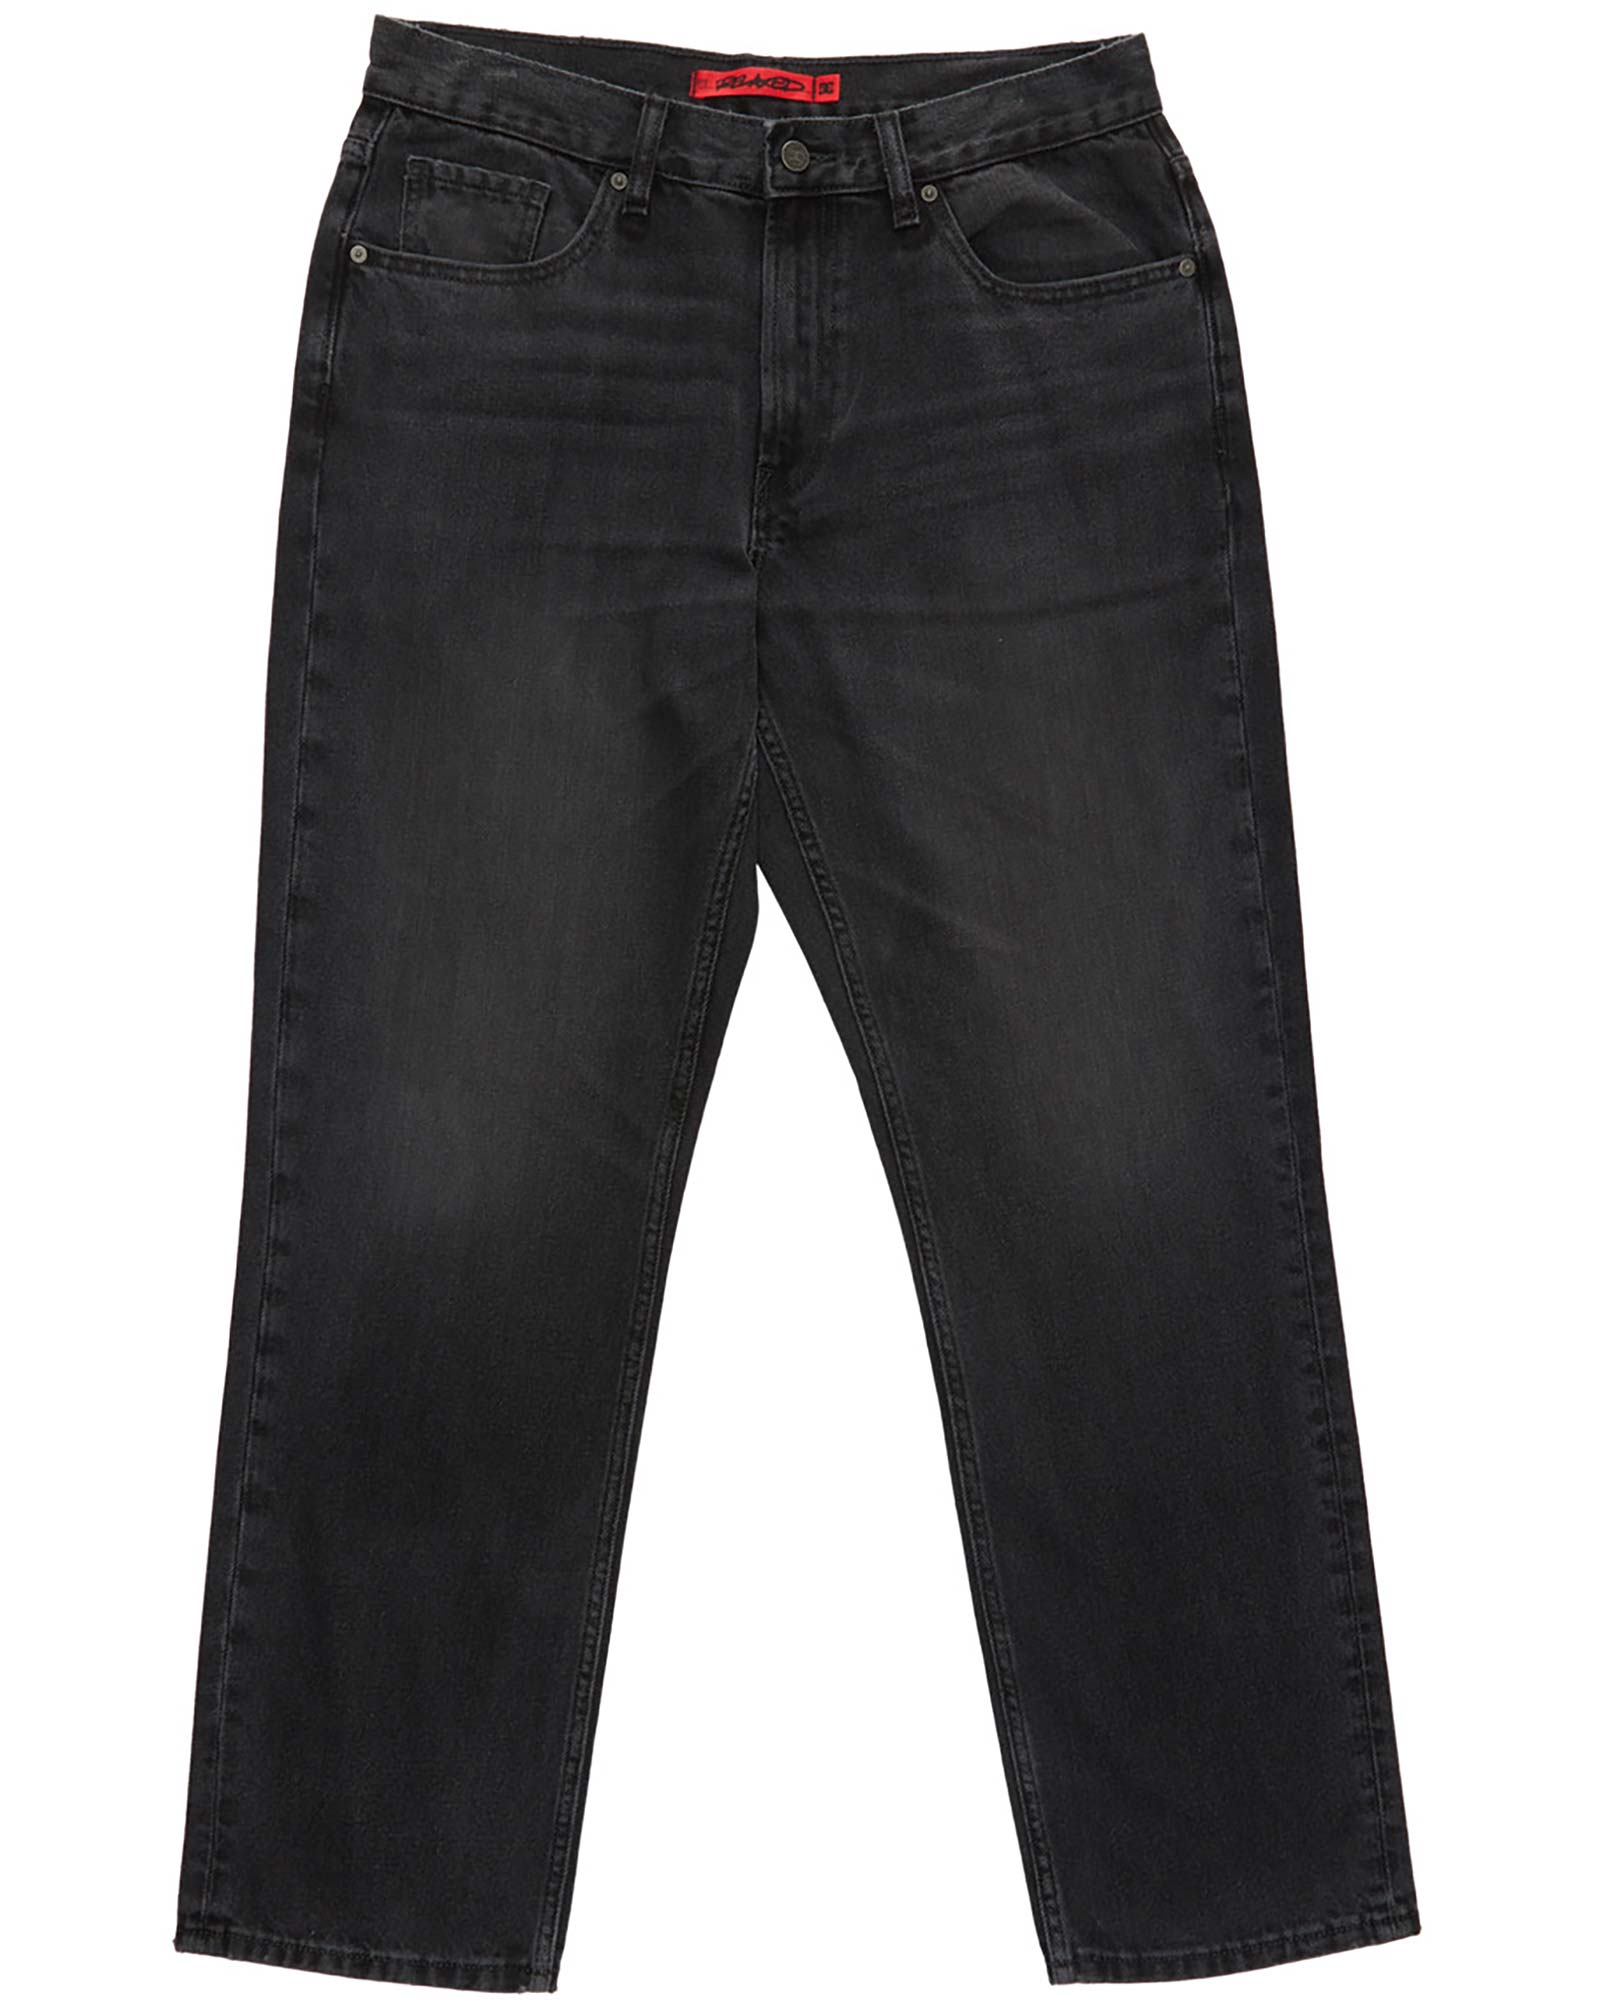 DC Men's Worker Relaxed Denim Trousers